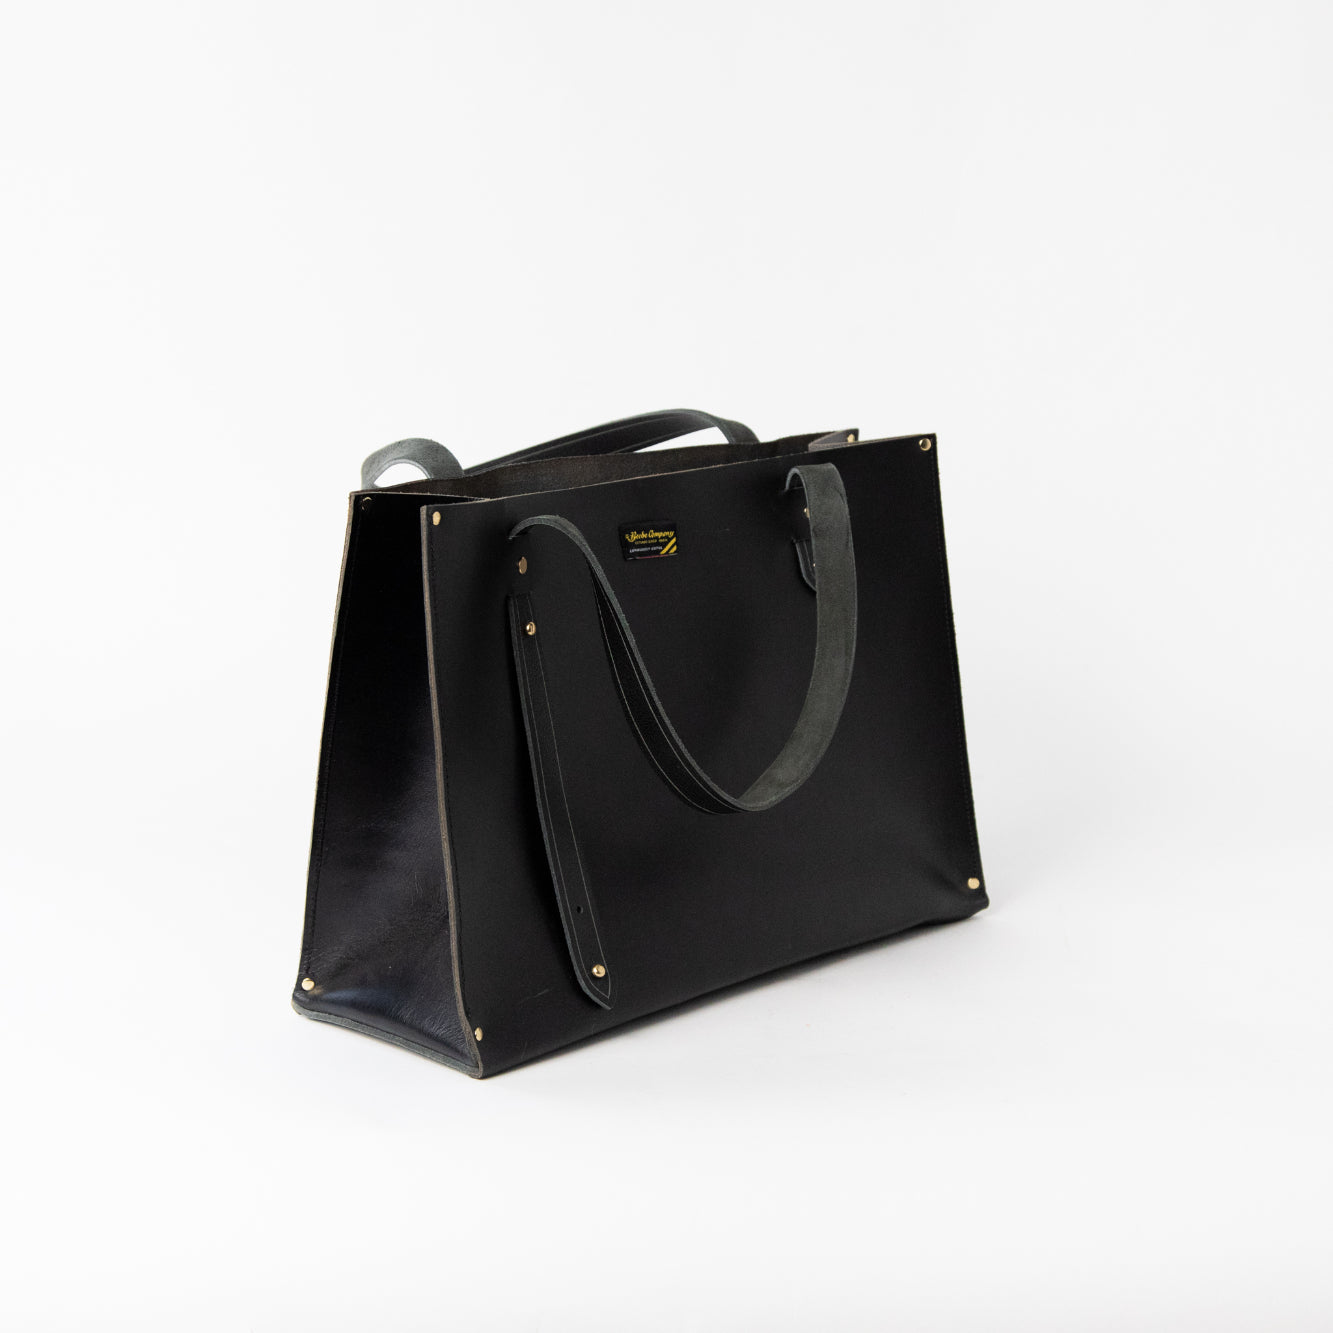 MAGAVERN LEATHER TOTE BAG / THE EDITOR